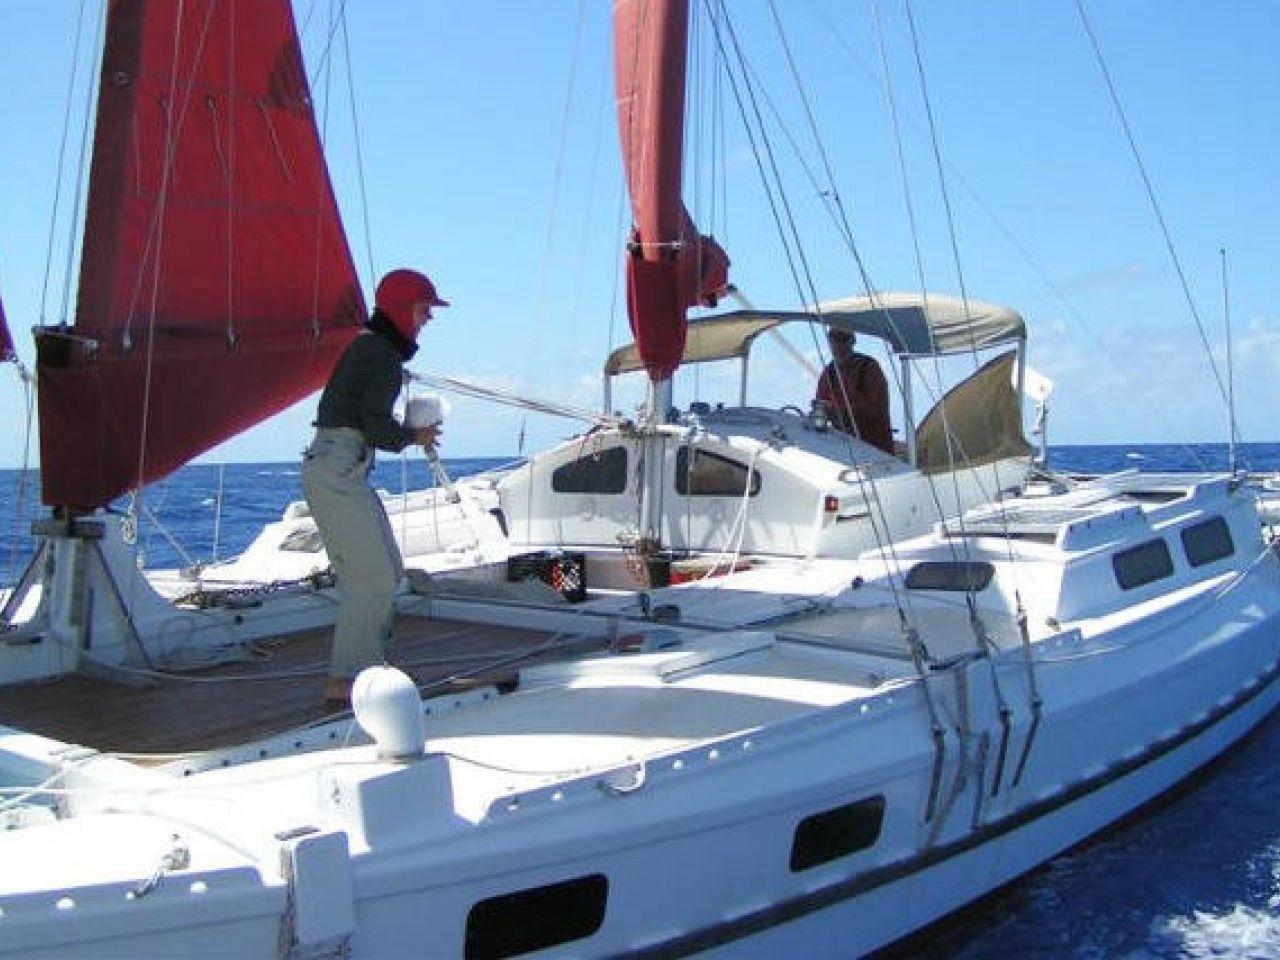 Large catamaran with red sails at sea, one person on deck